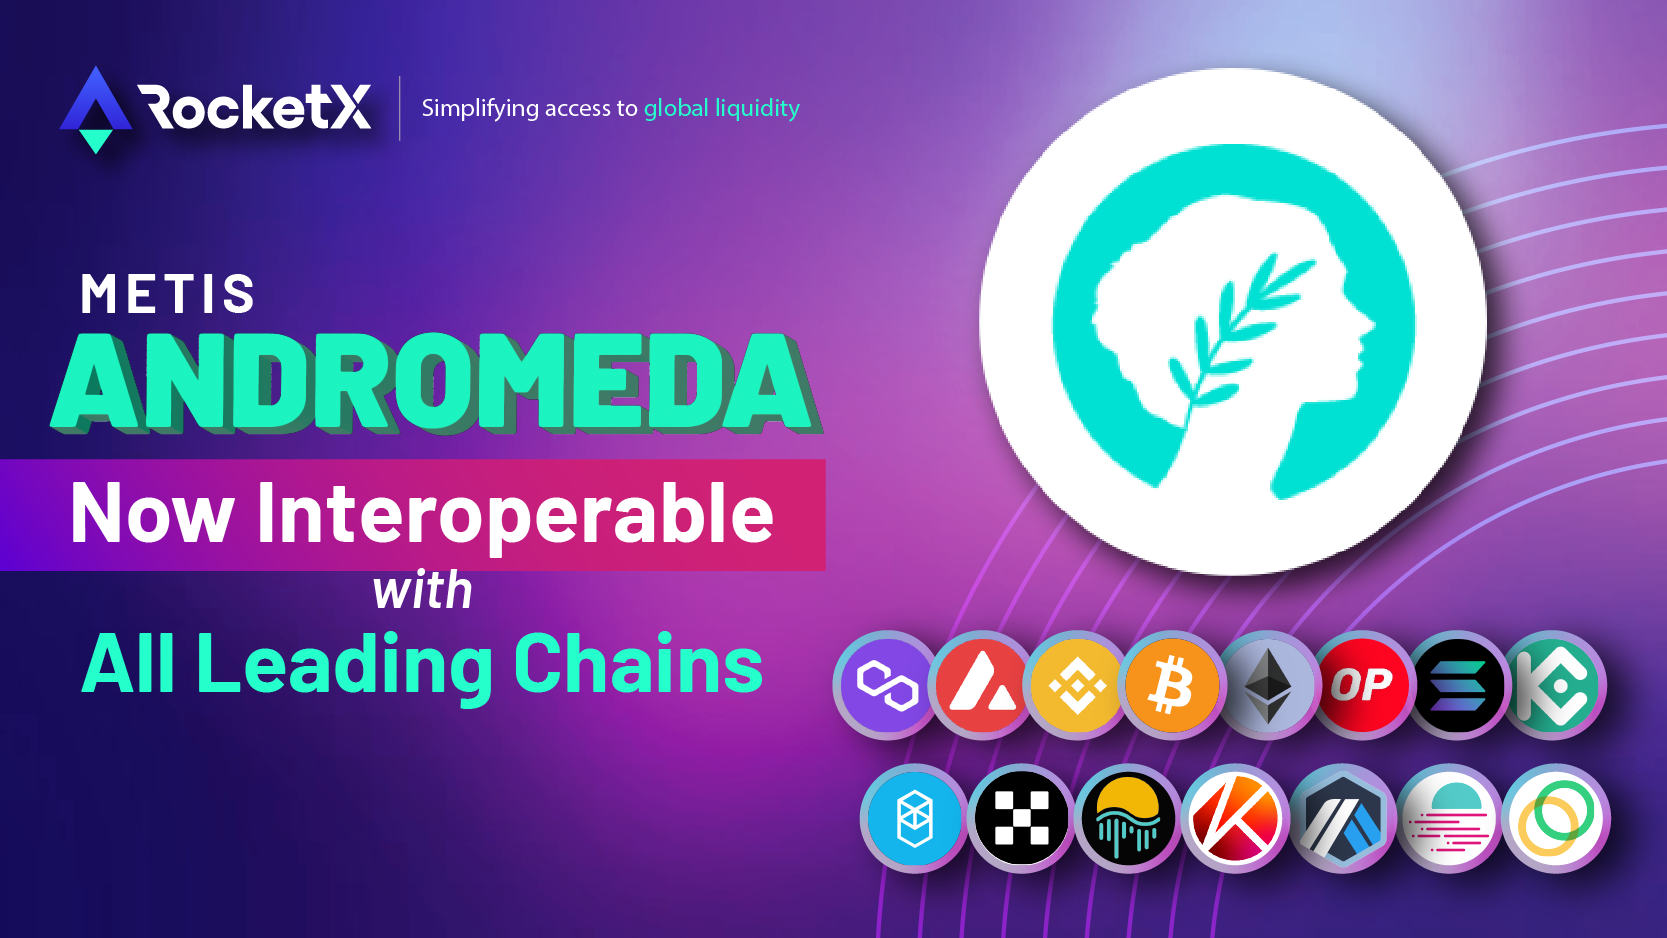 Metis Andromeda Network, making it interoperable with Bitcoin, Ethereum, BNB Chain, Polygon Matic, and 16 other leading blockchains, via RocketX.<br />
With 1-click cross-chain swaps, you can easily move between Metis Andromeda, Bitcoin, Ethereum, and more!